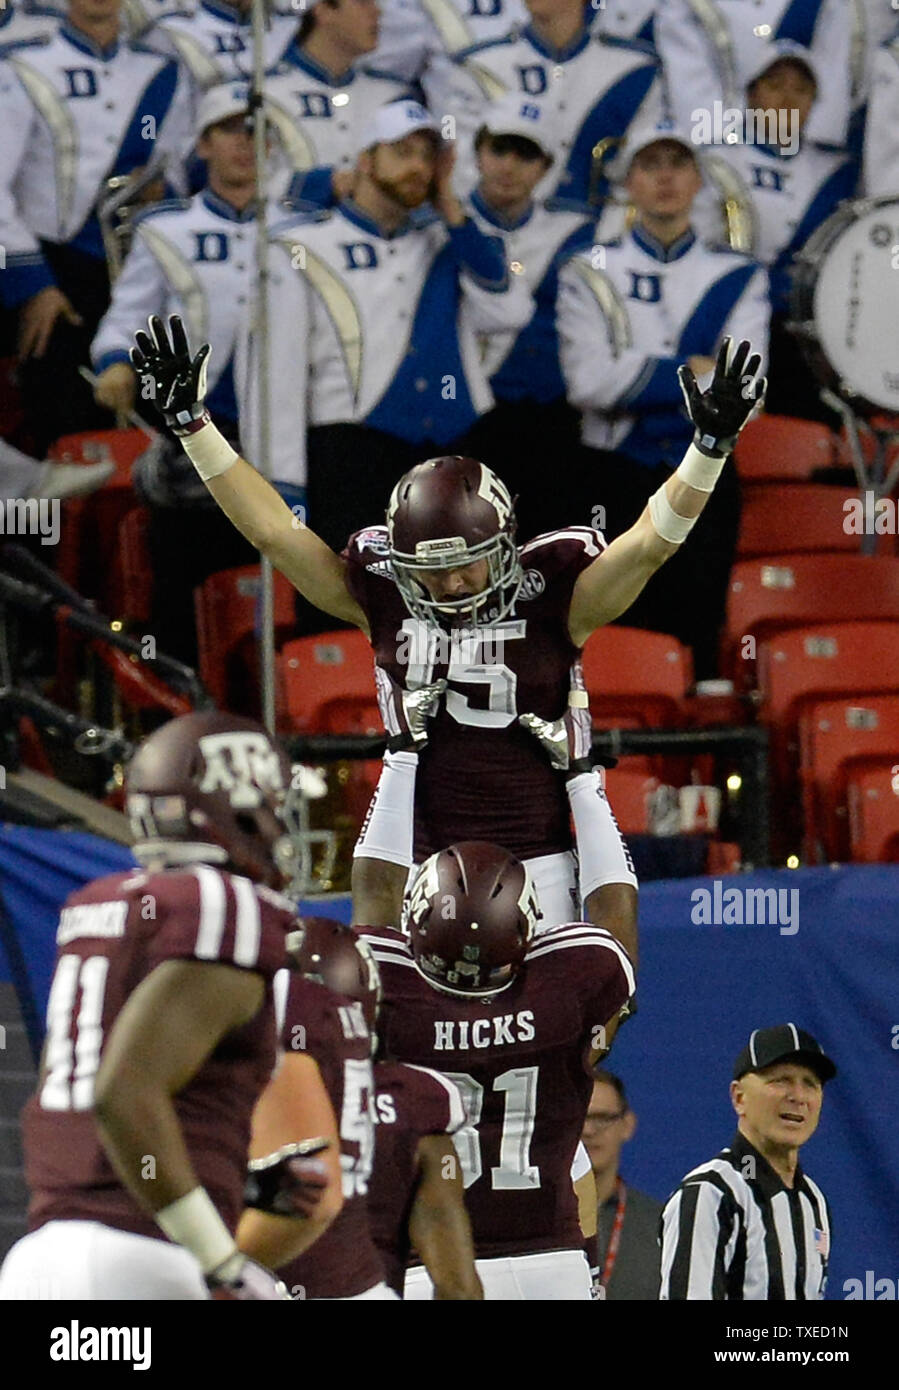 Texas A&M wide receiver Travis Labhart (15) celebrates his 9-yard touchdown catch over Duke with teammate Nehemiah Hicks during the first half of the Chick-fil-A Bowl football game at the Georgia Dome on December 31, 2013. UPI/David Tulis Stock Photo